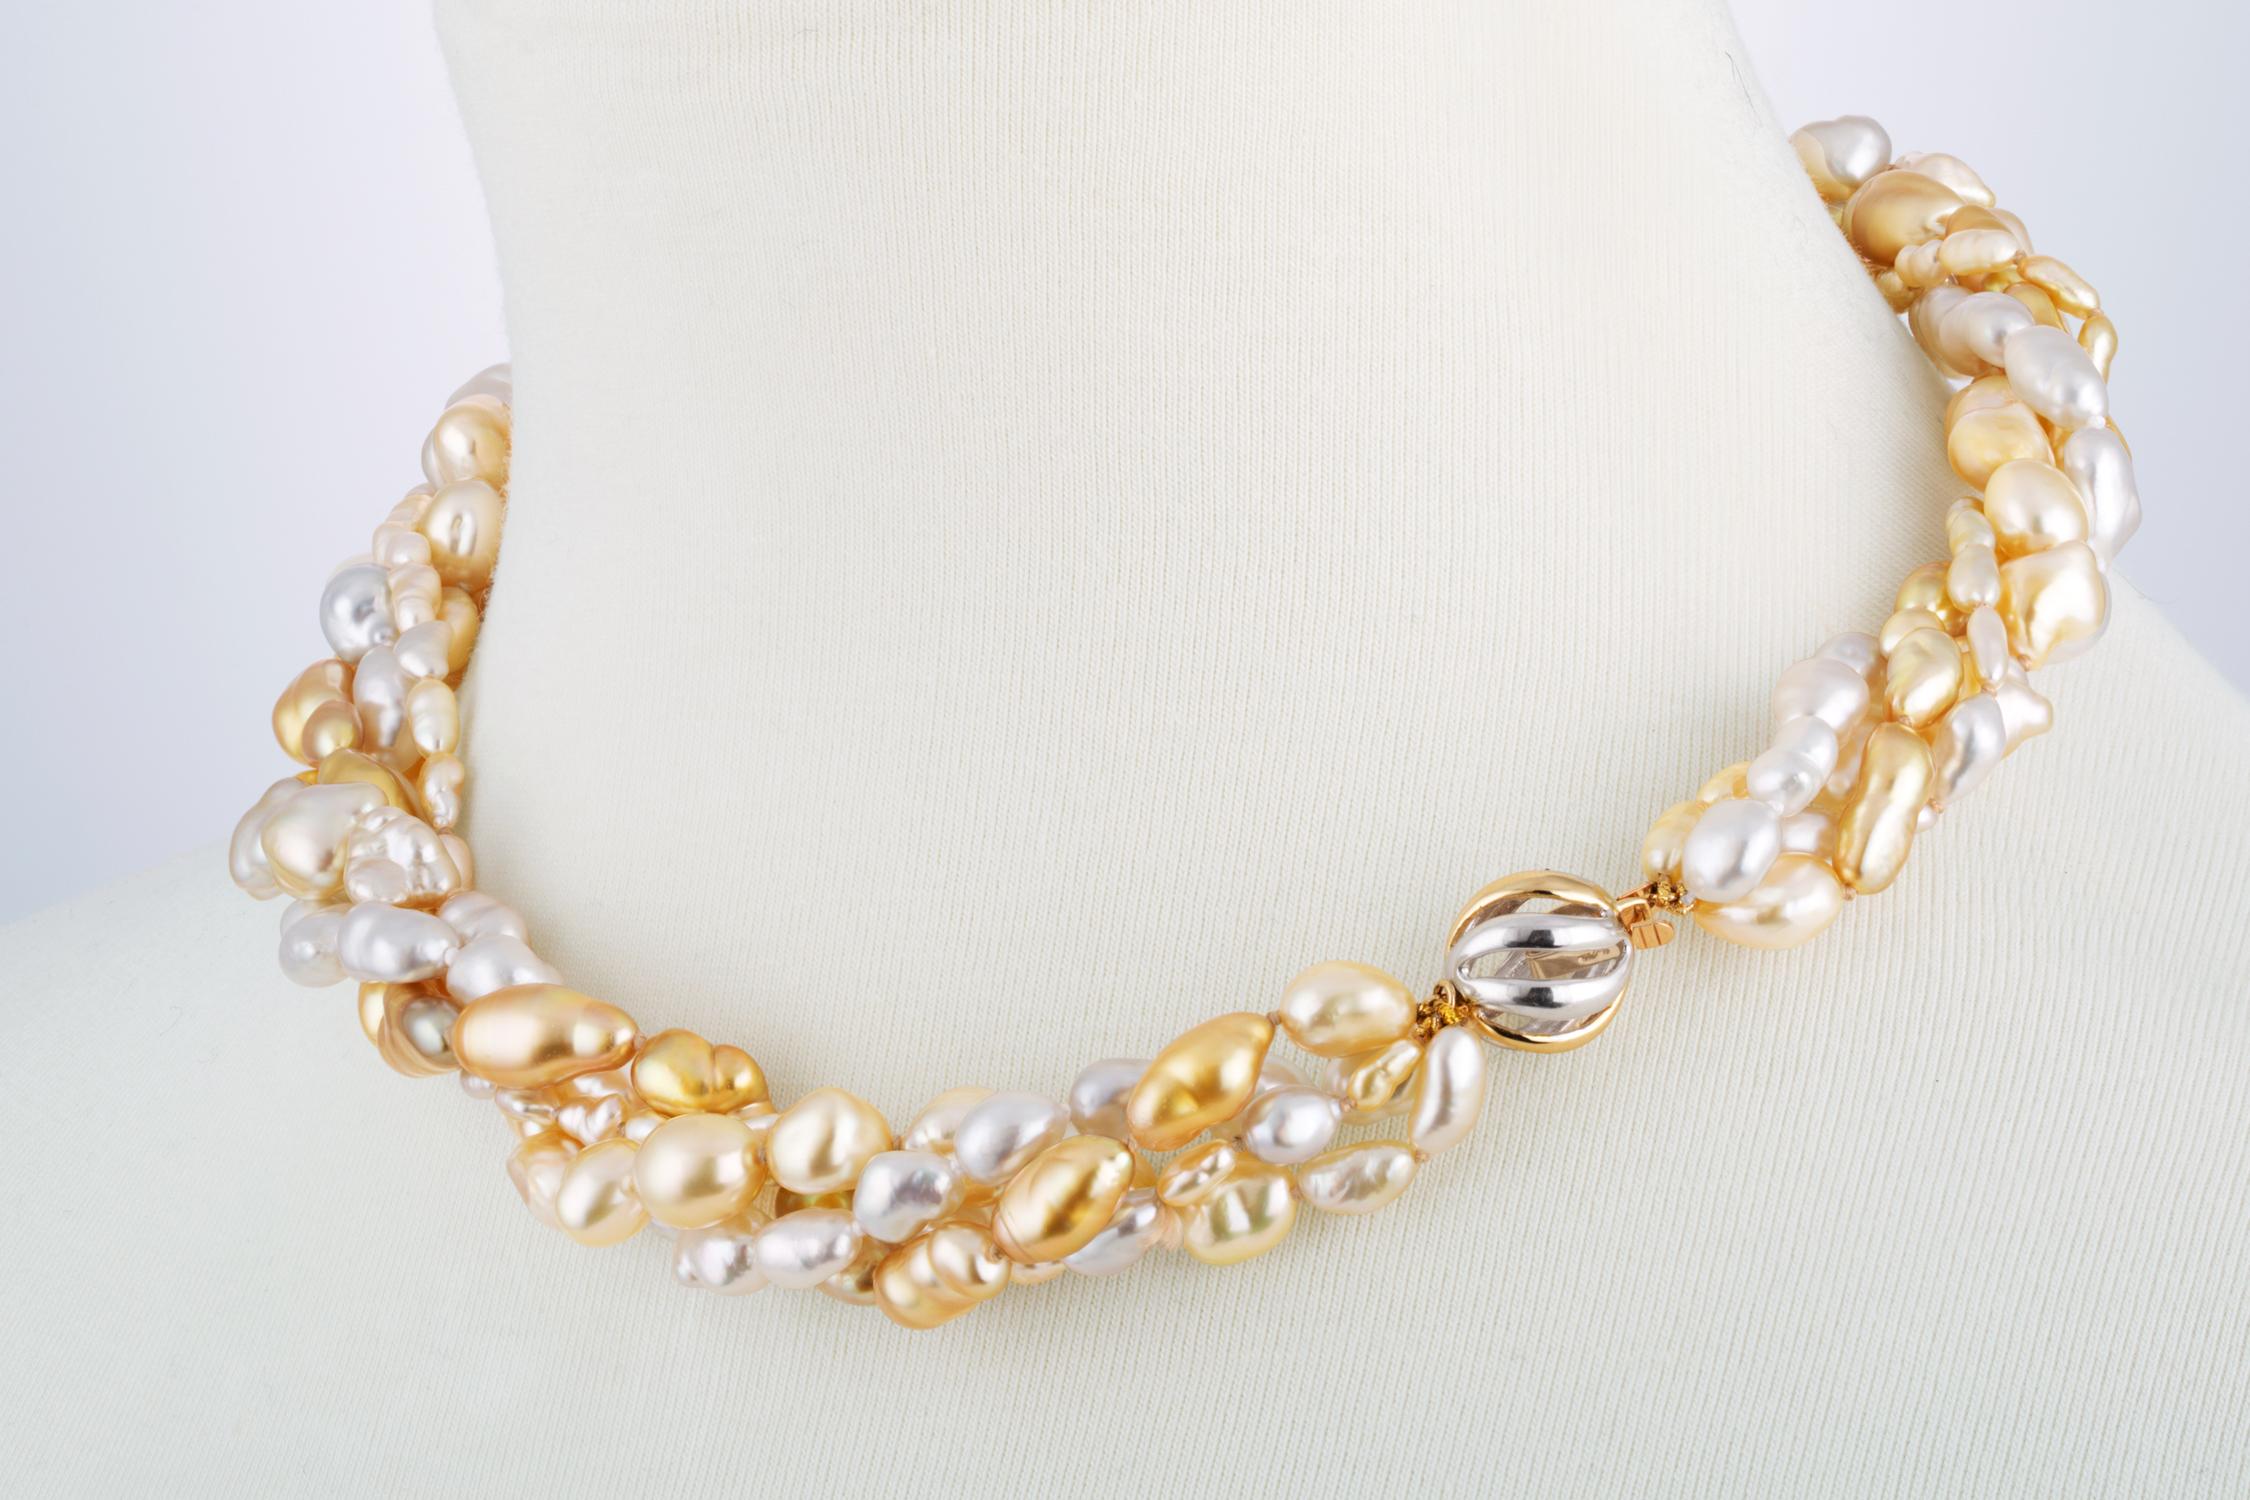 This multi strand South Sea white and South Sea golden Keshi cultured pearl necklace features multiple strands of pearls that range in size from 4 to 10mm. There are four strands of pearls strung in a twisted design with a clasp that features 14